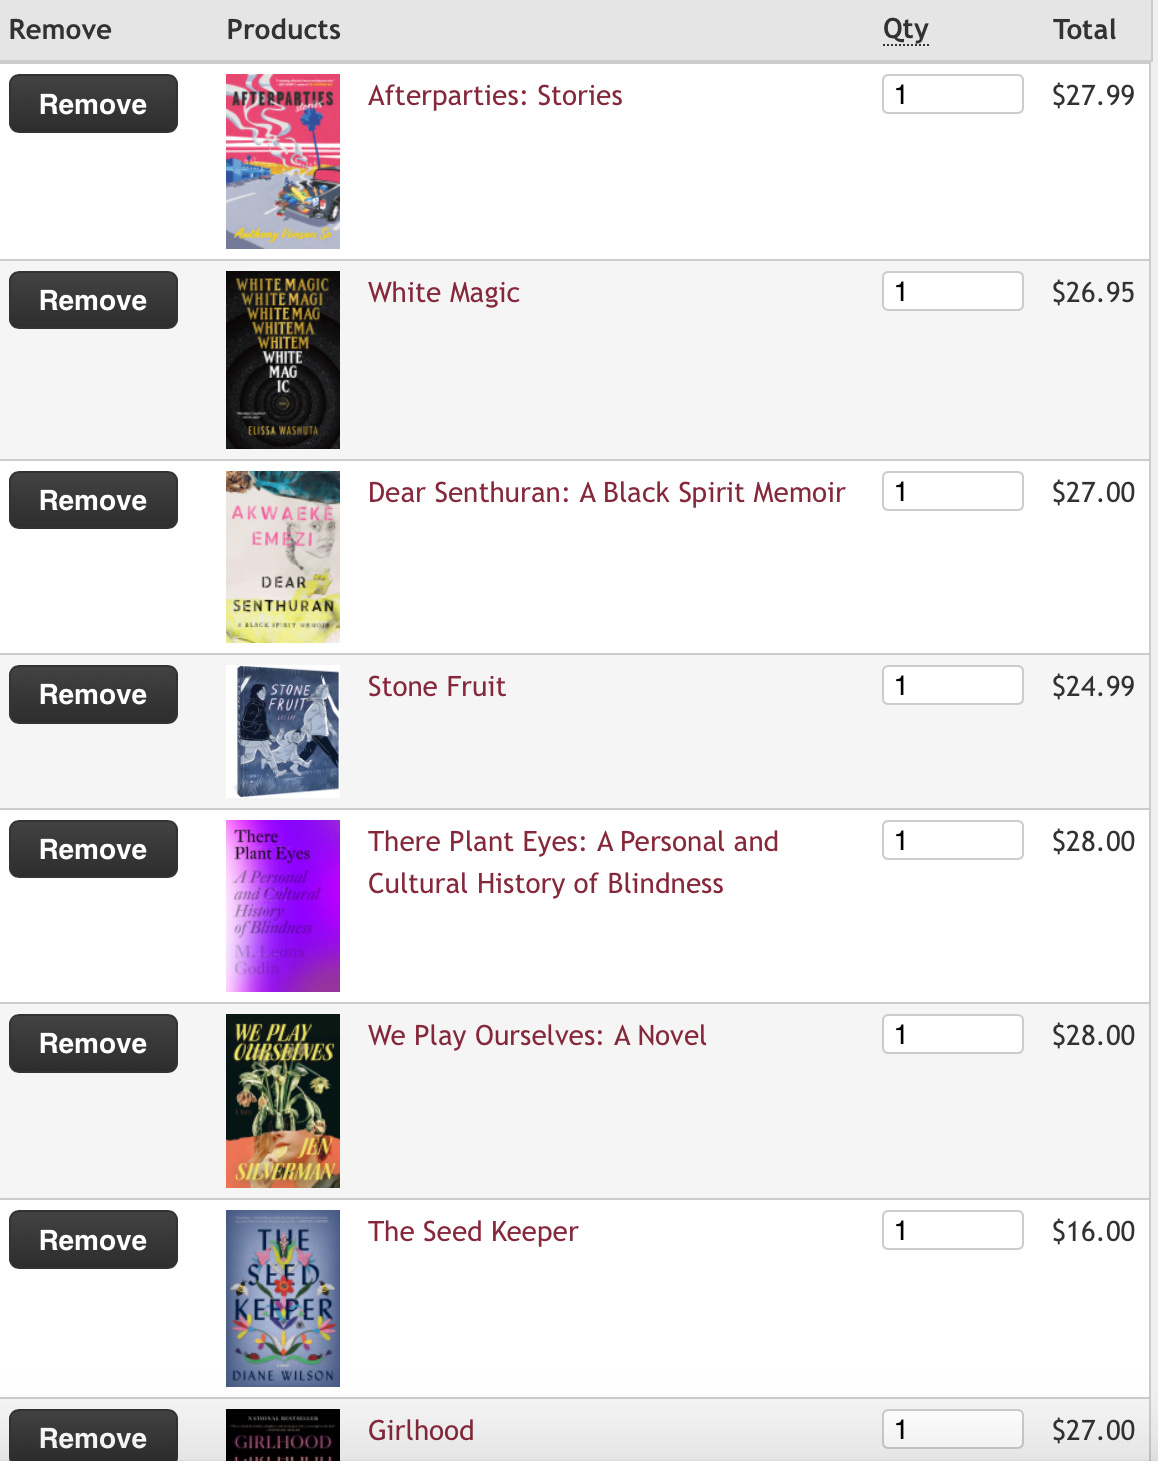 Screenshot of a online shopping cart containing the following books: Afterparties, White Magic, Dear Senthuran, Stone Fruit, There Plant Eyes, We Play Ourselves, The Seed Keeper, Girlhood.